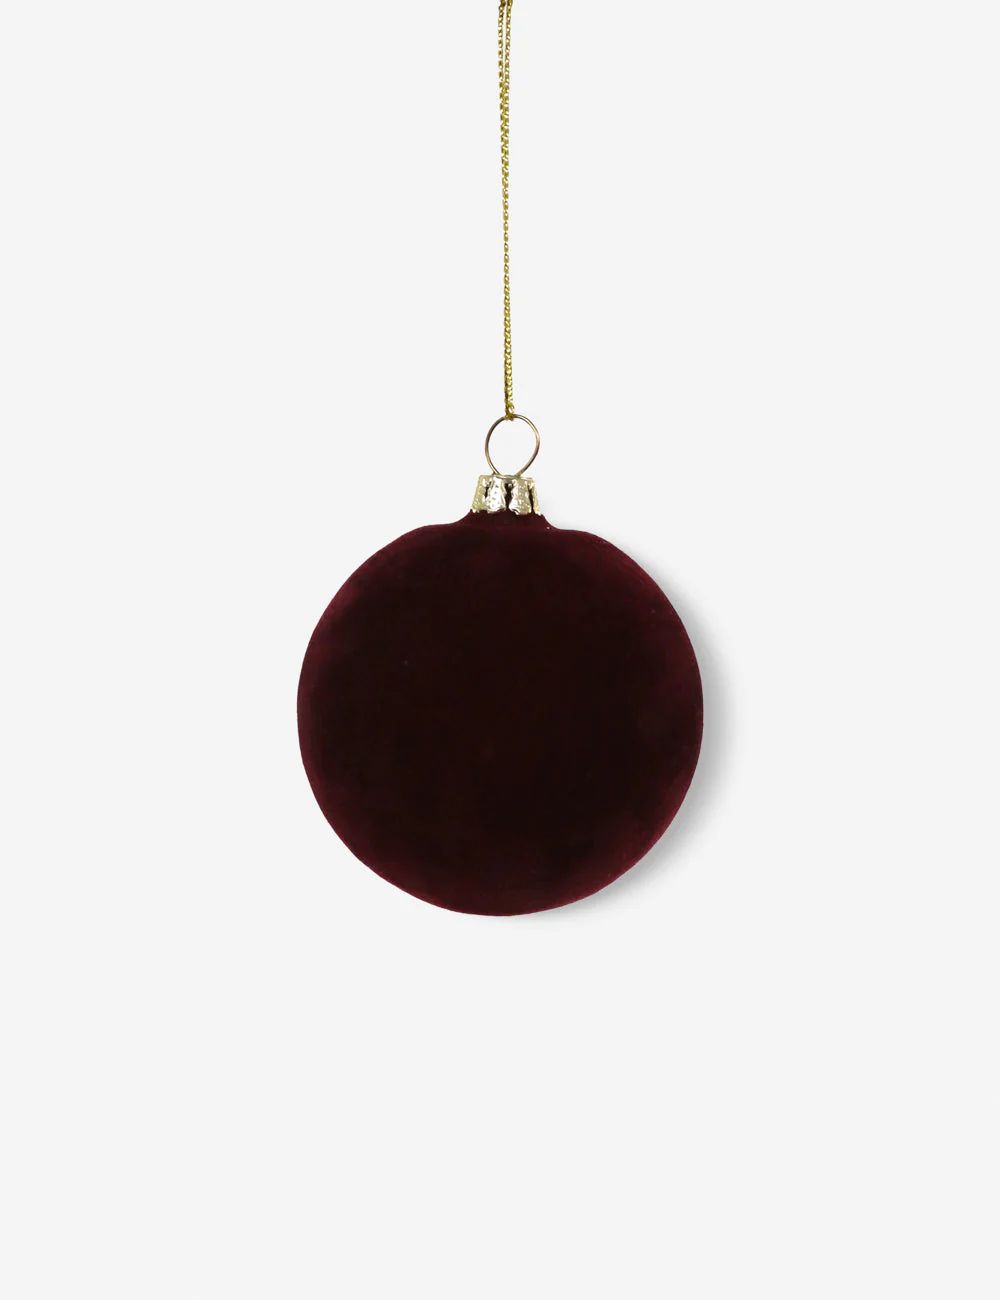 Velvet Ball Ornament (Set of 2) by Cody Foster and Co | Lulu and Georgia 